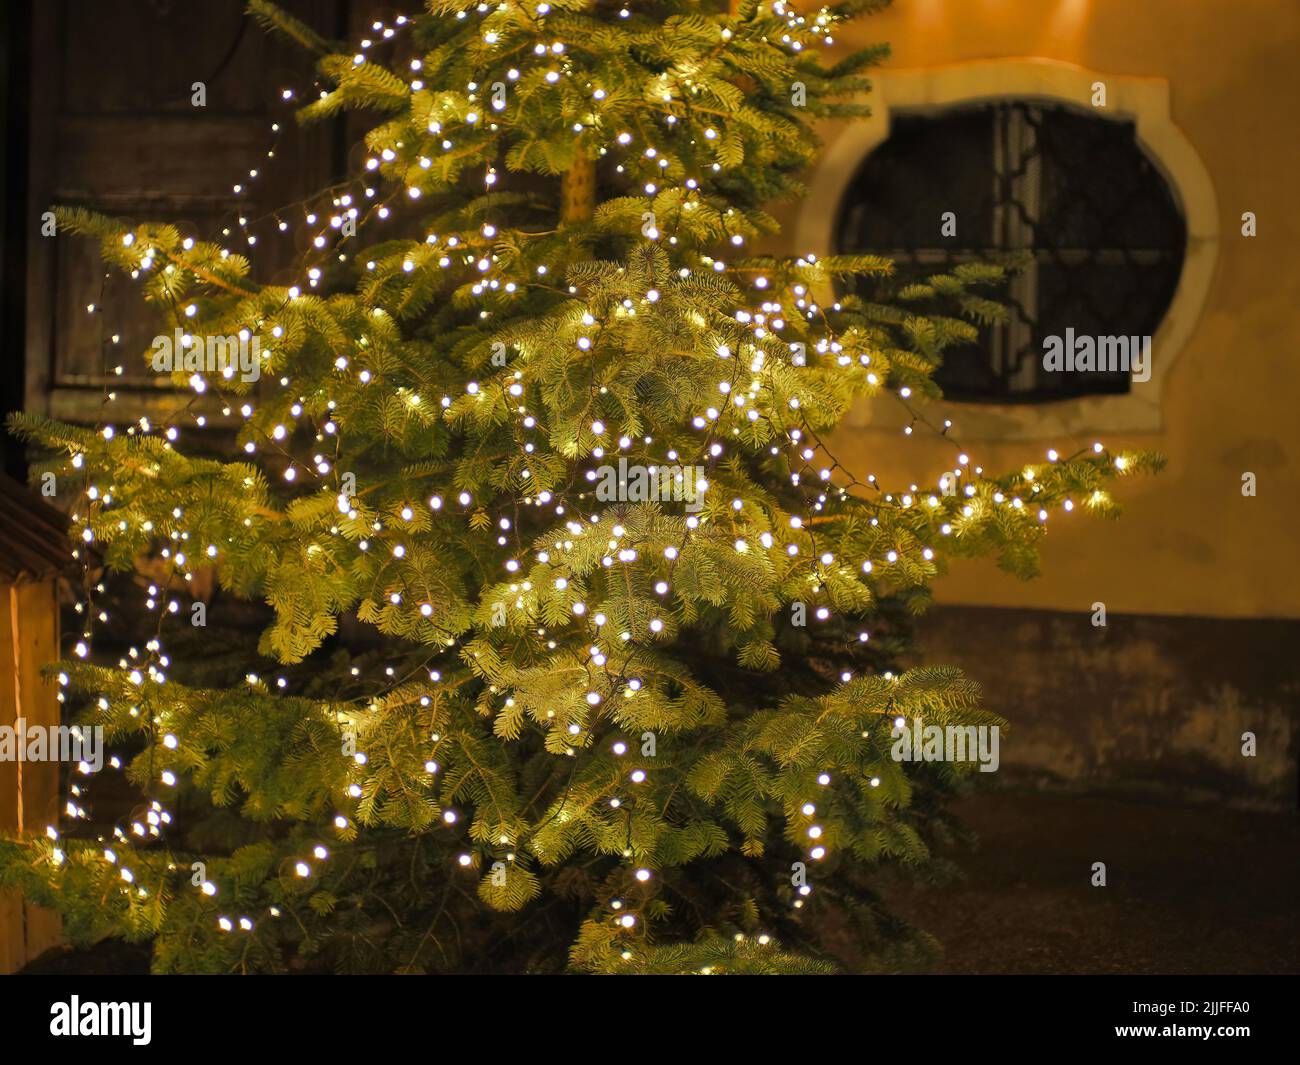 A fir decorated with the light garland outside Stock Photo